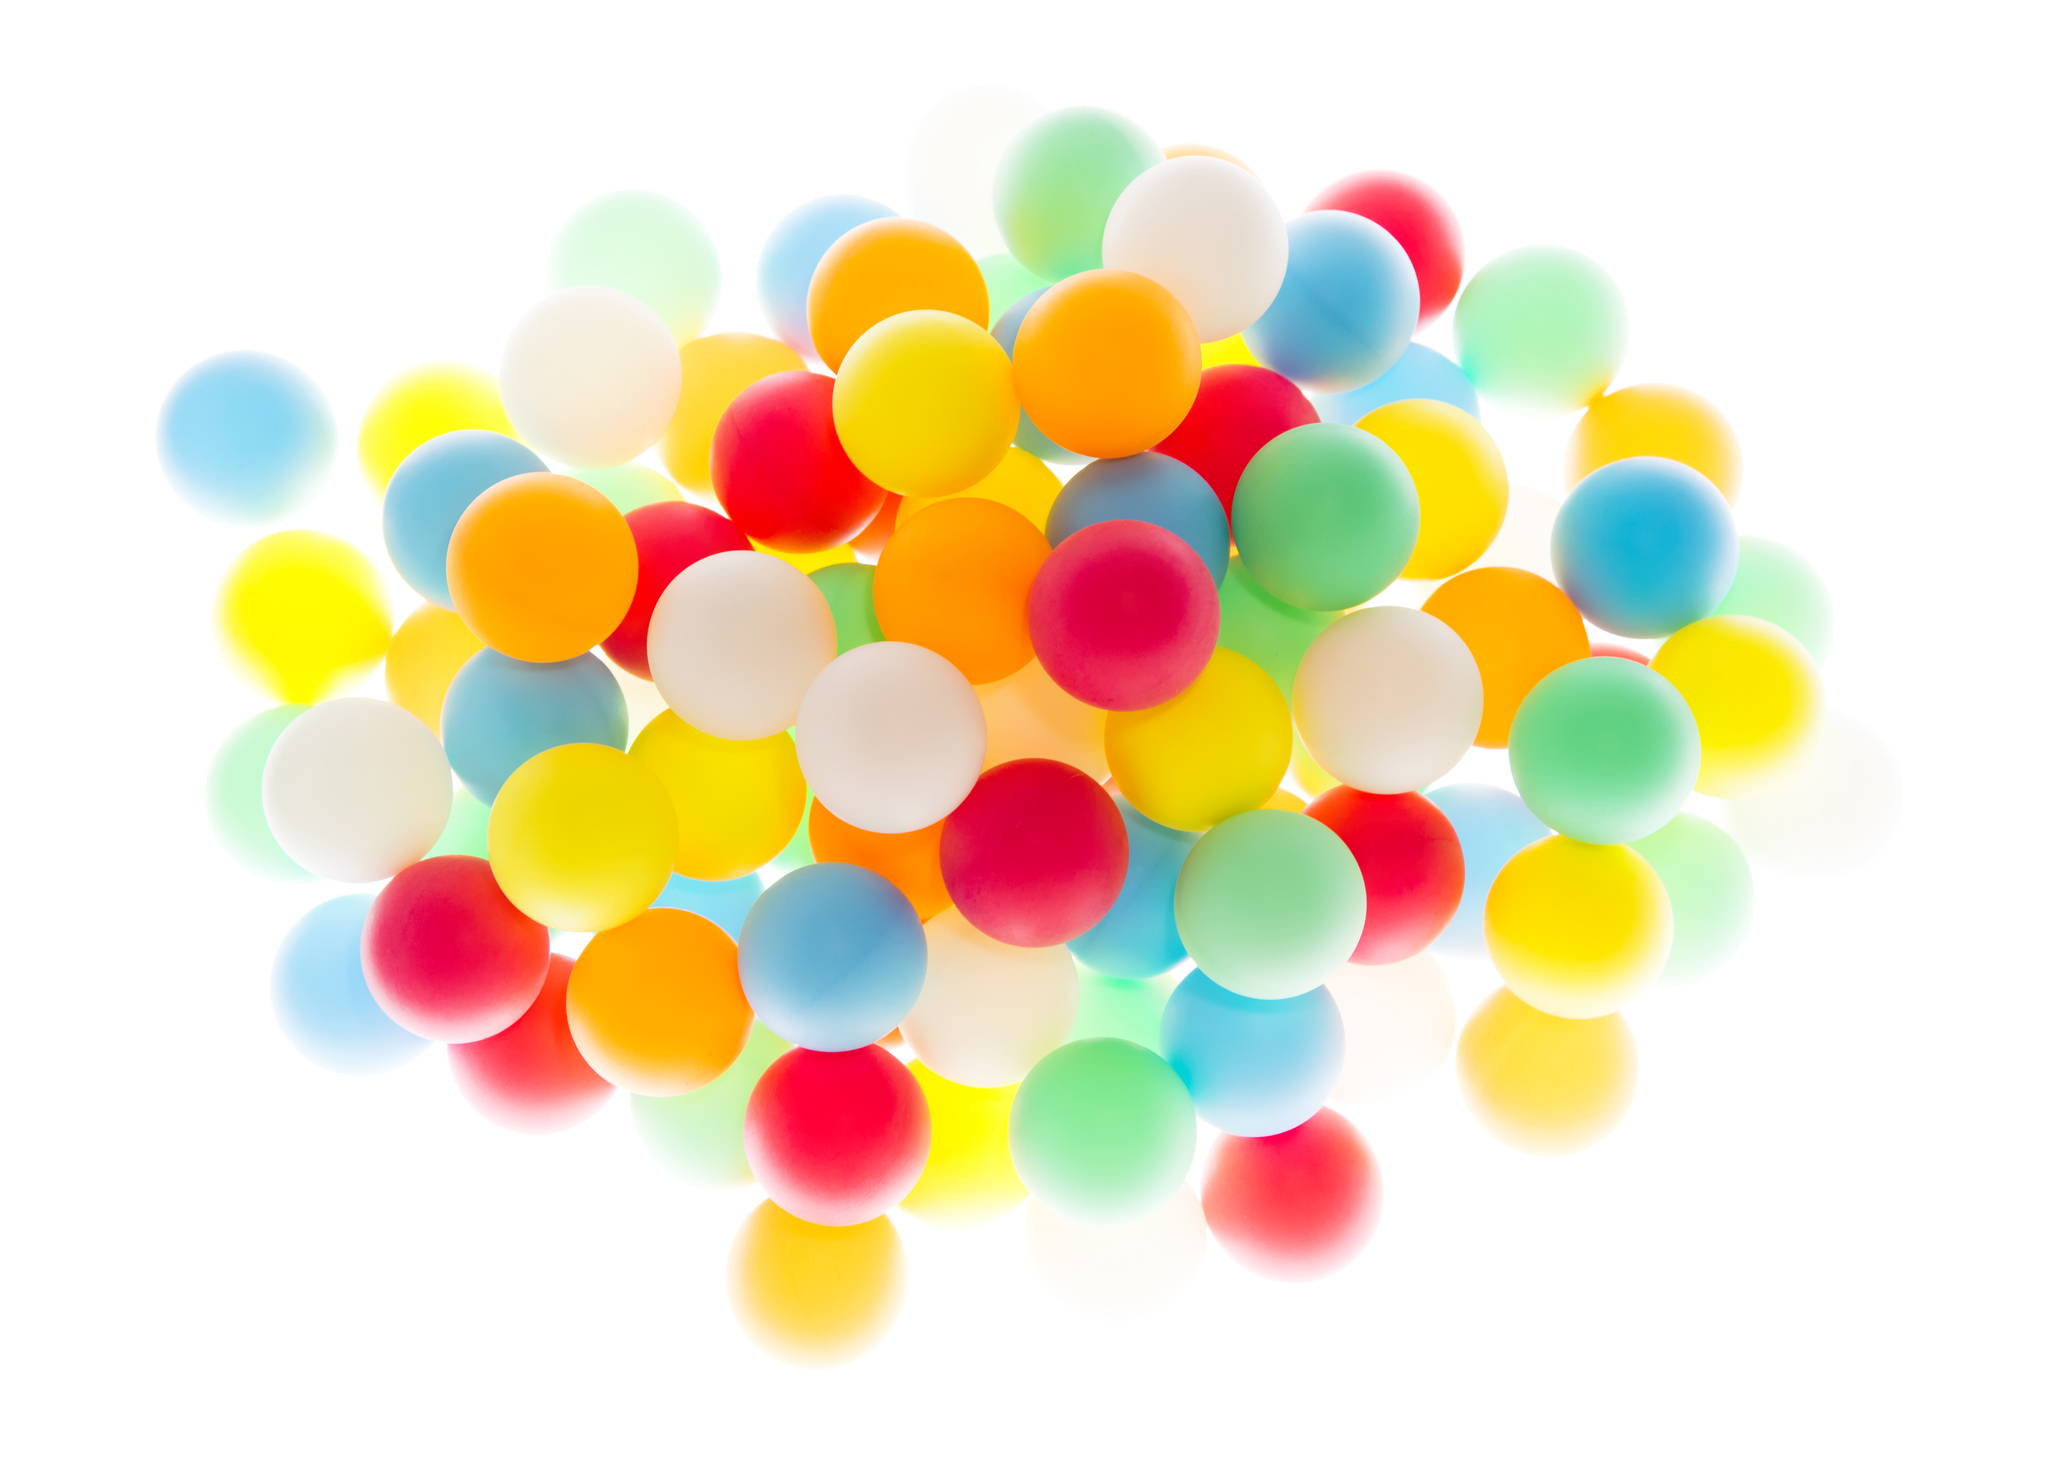 Tight cluster of multi colored spheres on high key white background